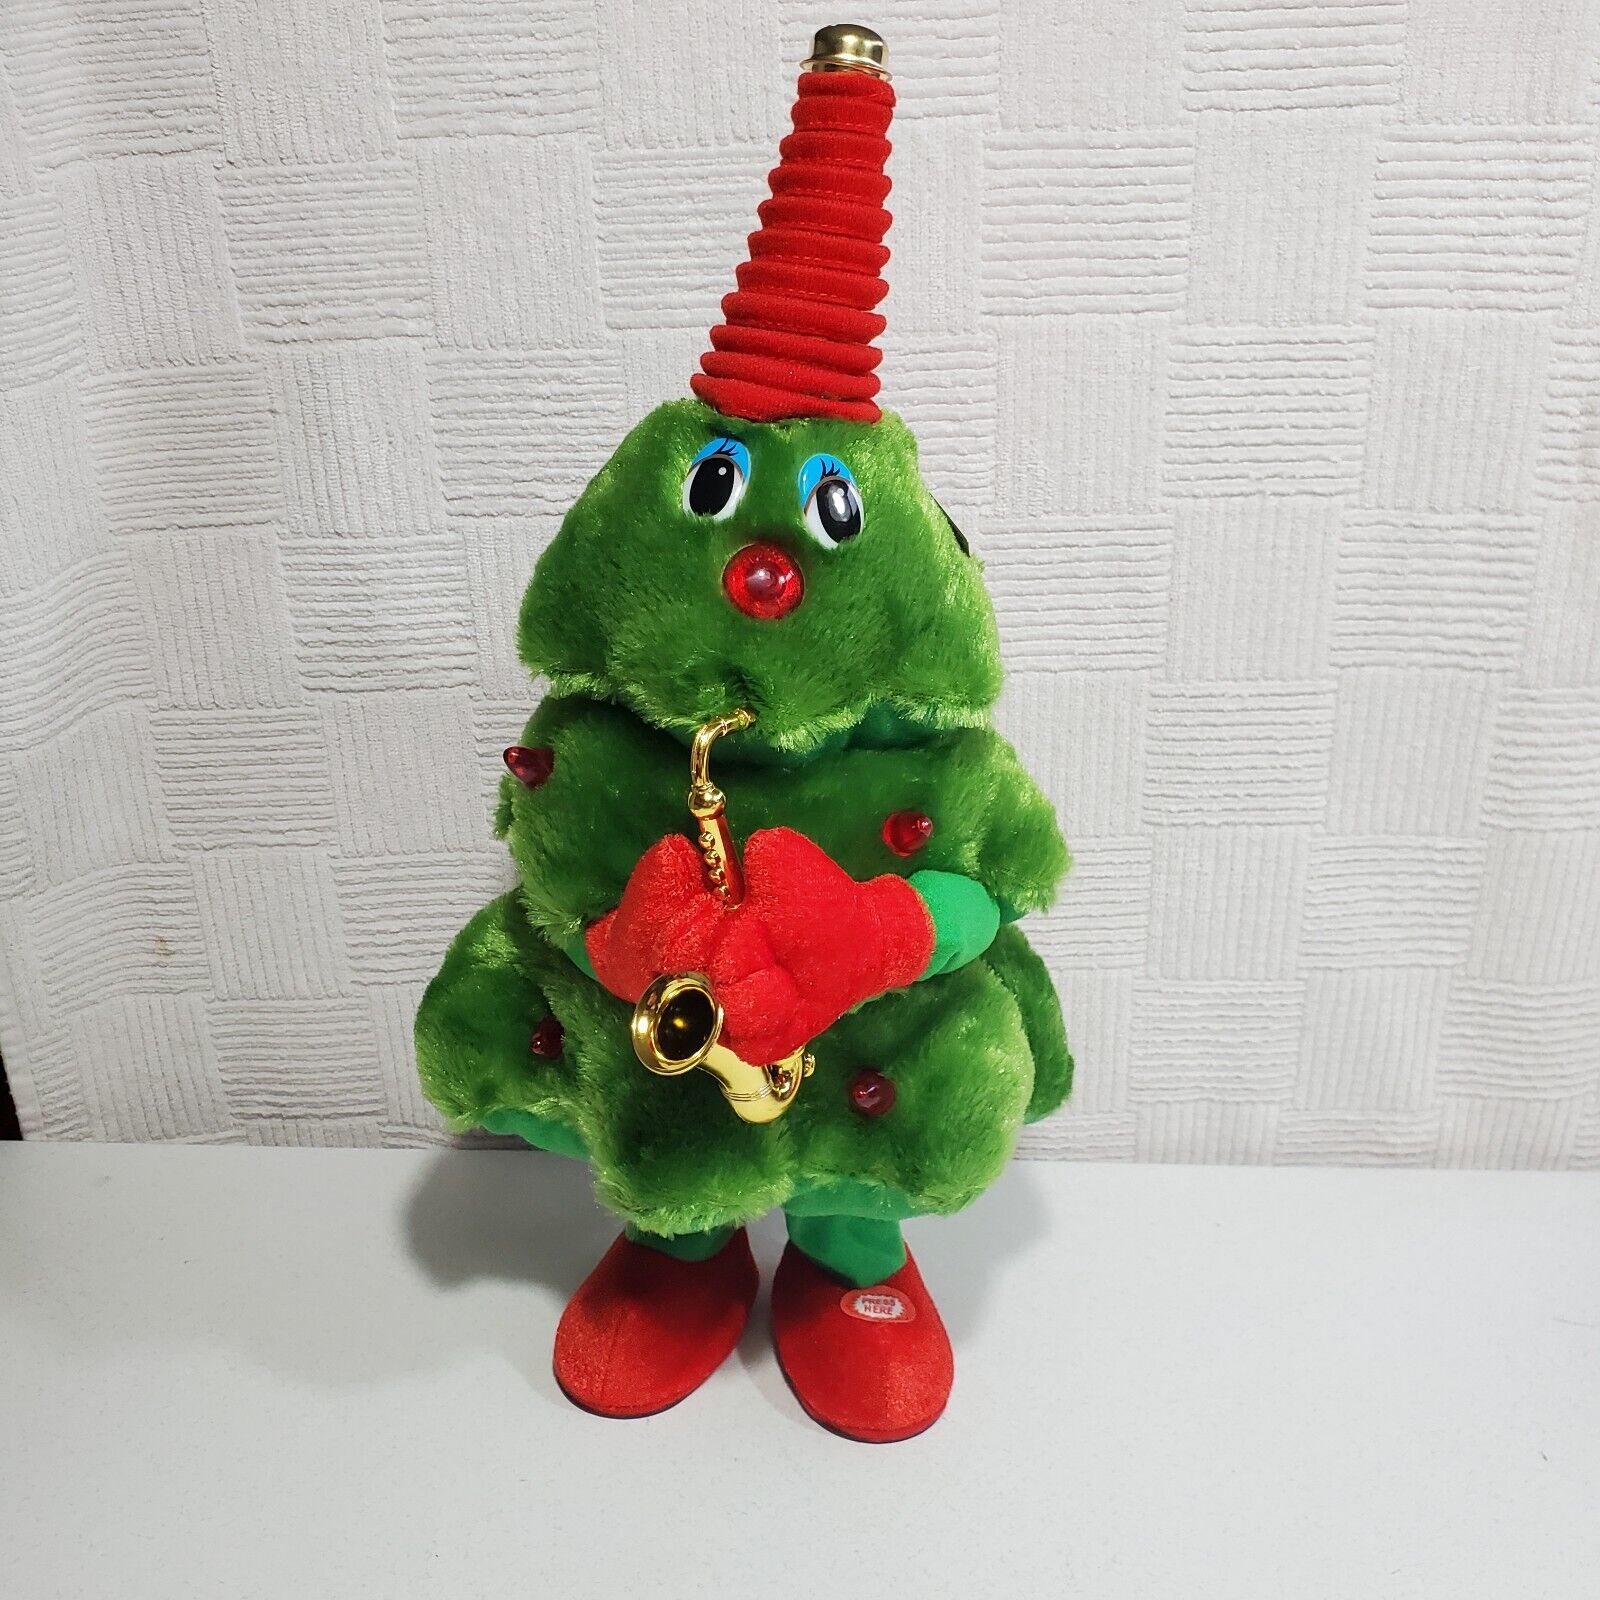 Animated Dancing Christmas Tree Plush Plays Saxophone Wild Hilarious See Video 